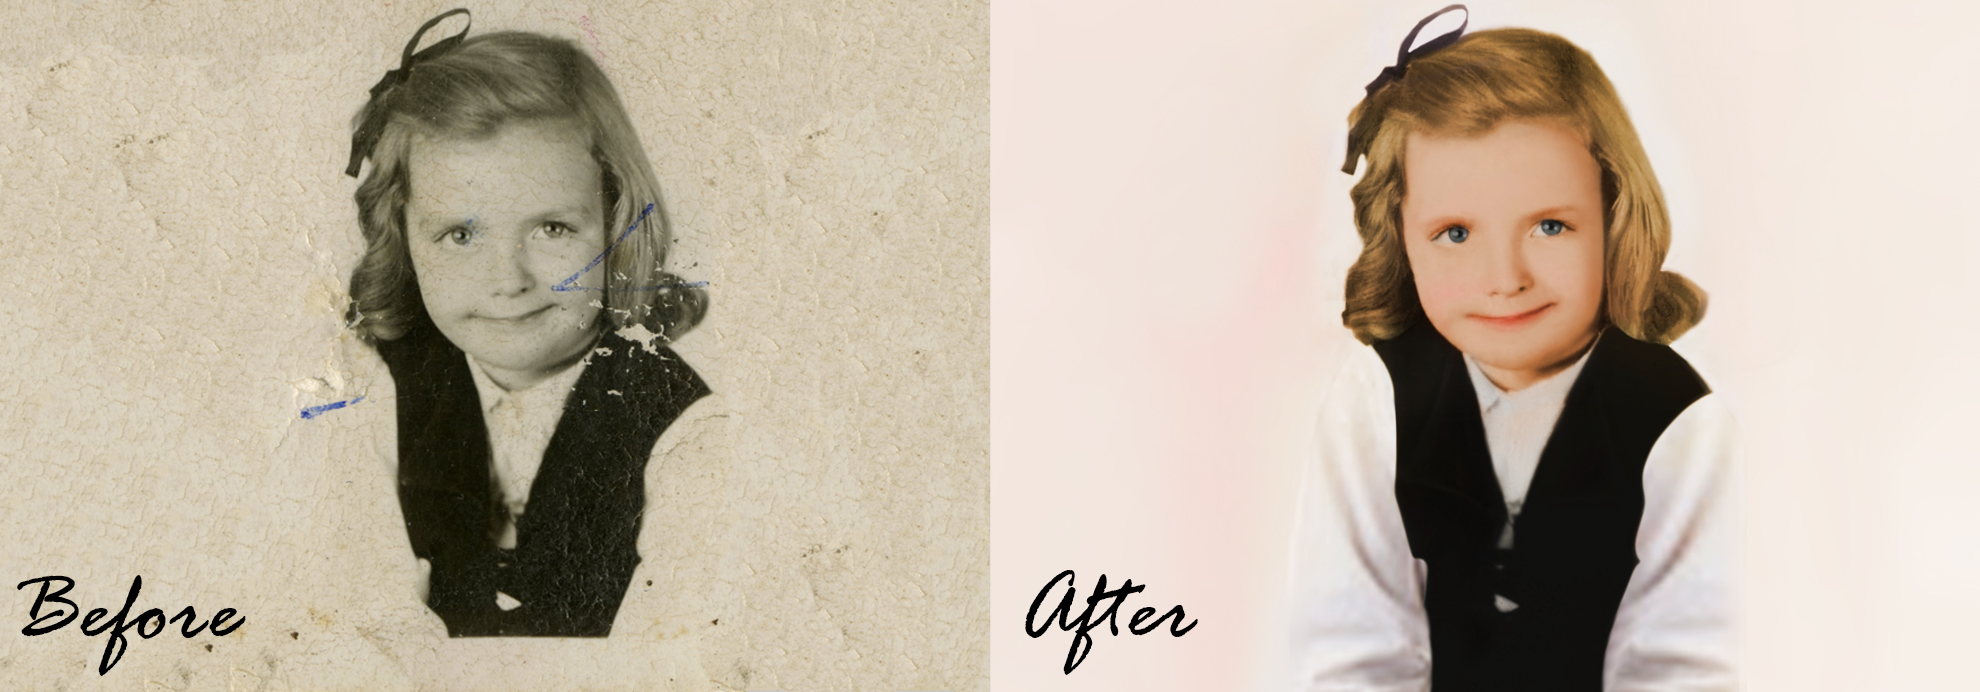 restore old photos service our old photographs are often put in